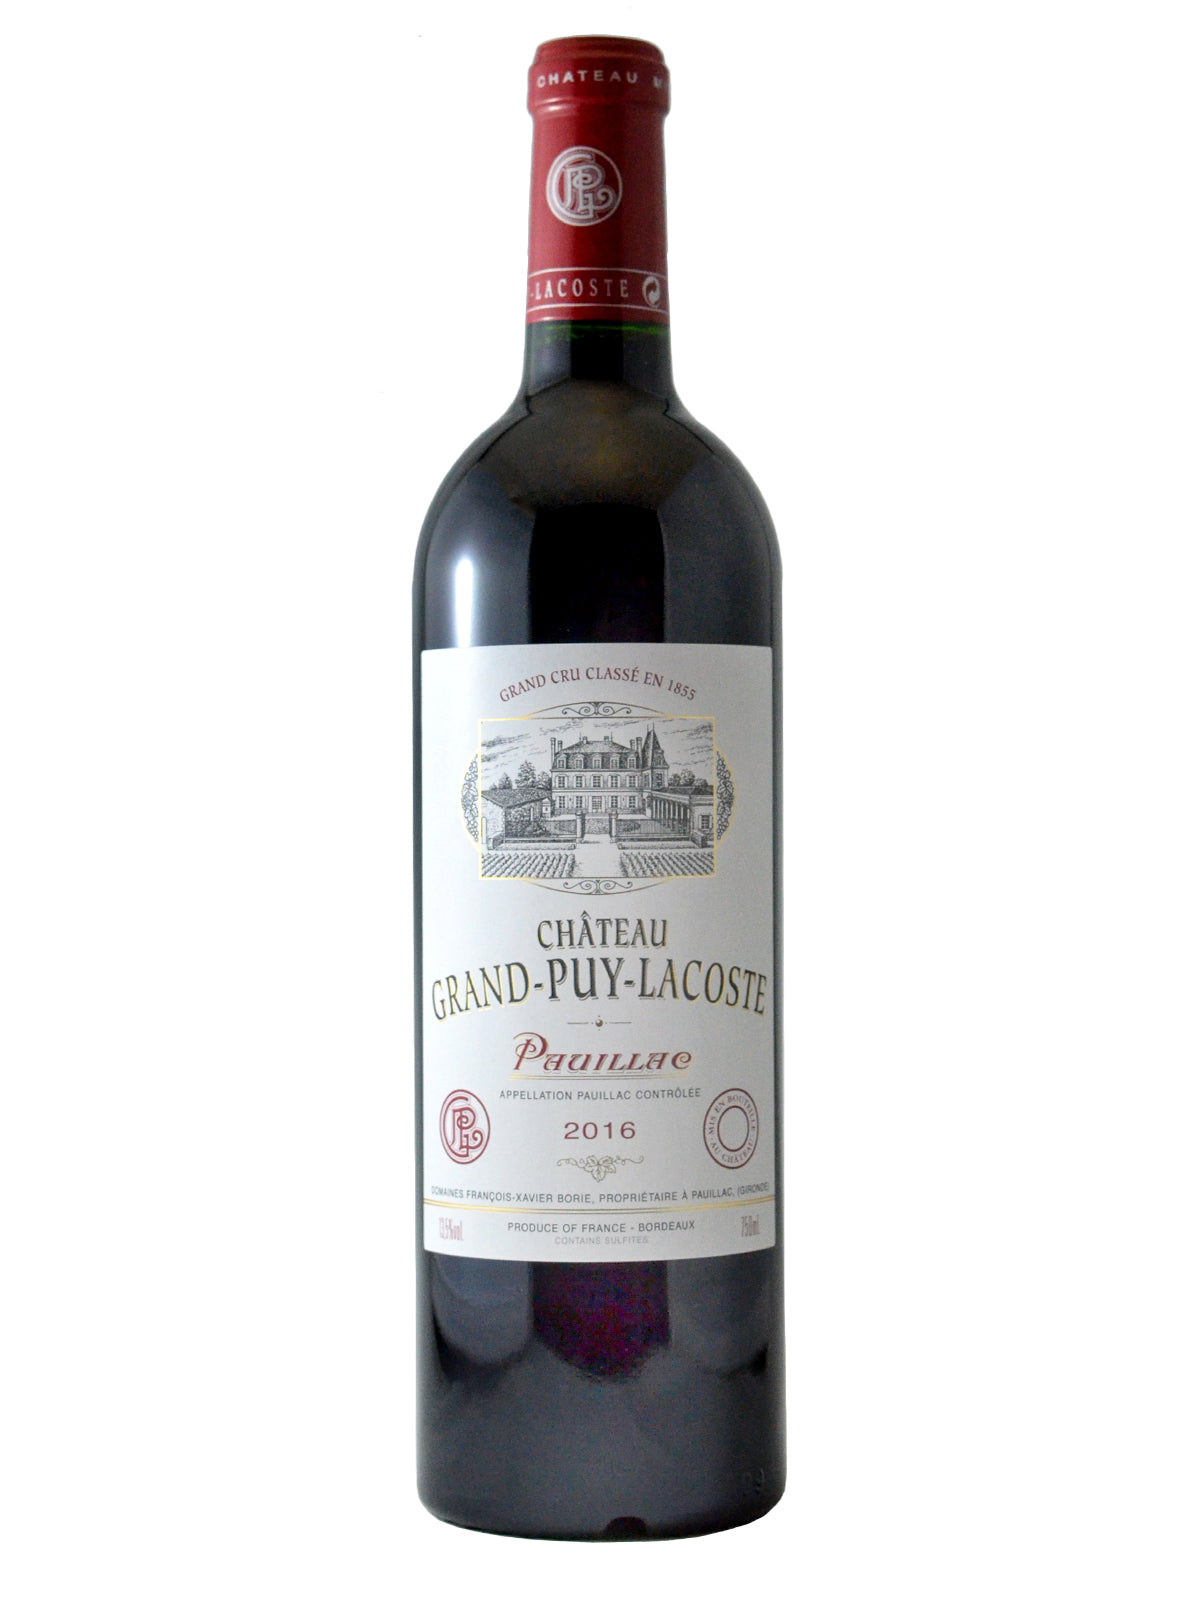 Chateau Grand Puy-Lacoste Pauillac 2016